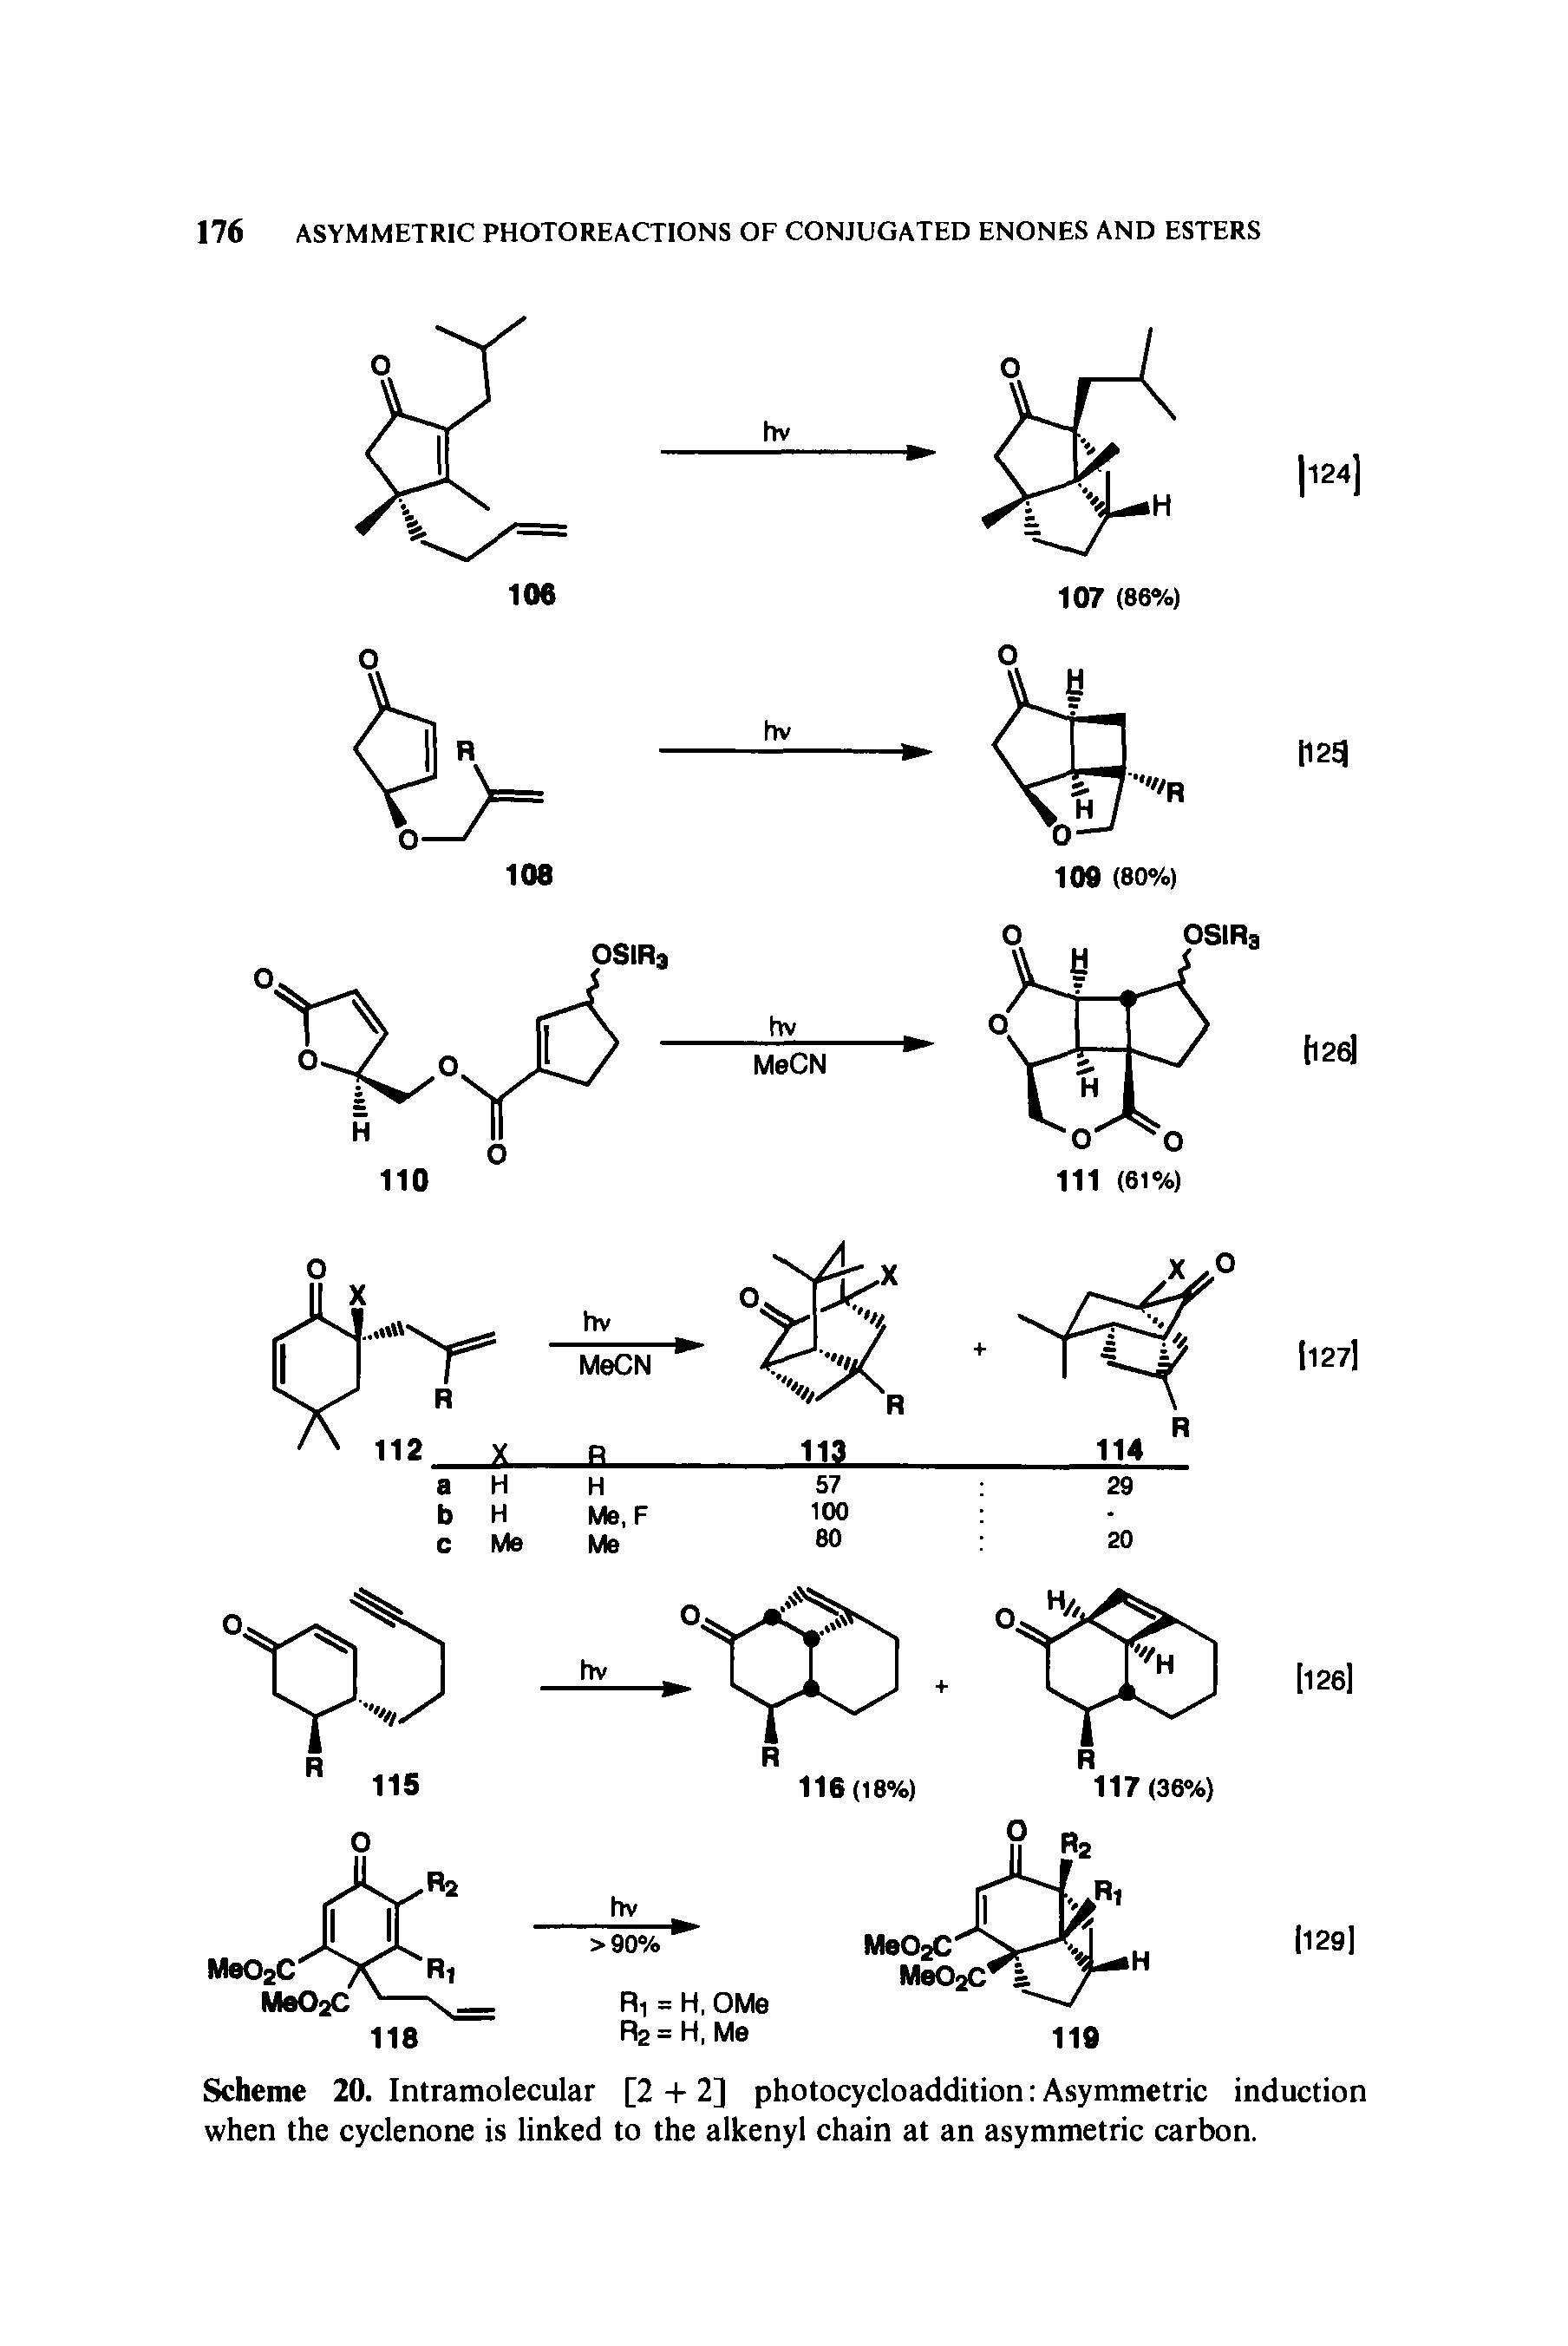 Scheme 20. Intramolecular [2 + 2] photocycloaddition Asymmetric induction when the cyclenone is linked to the alkenyl chain at an asymmetric carbon.